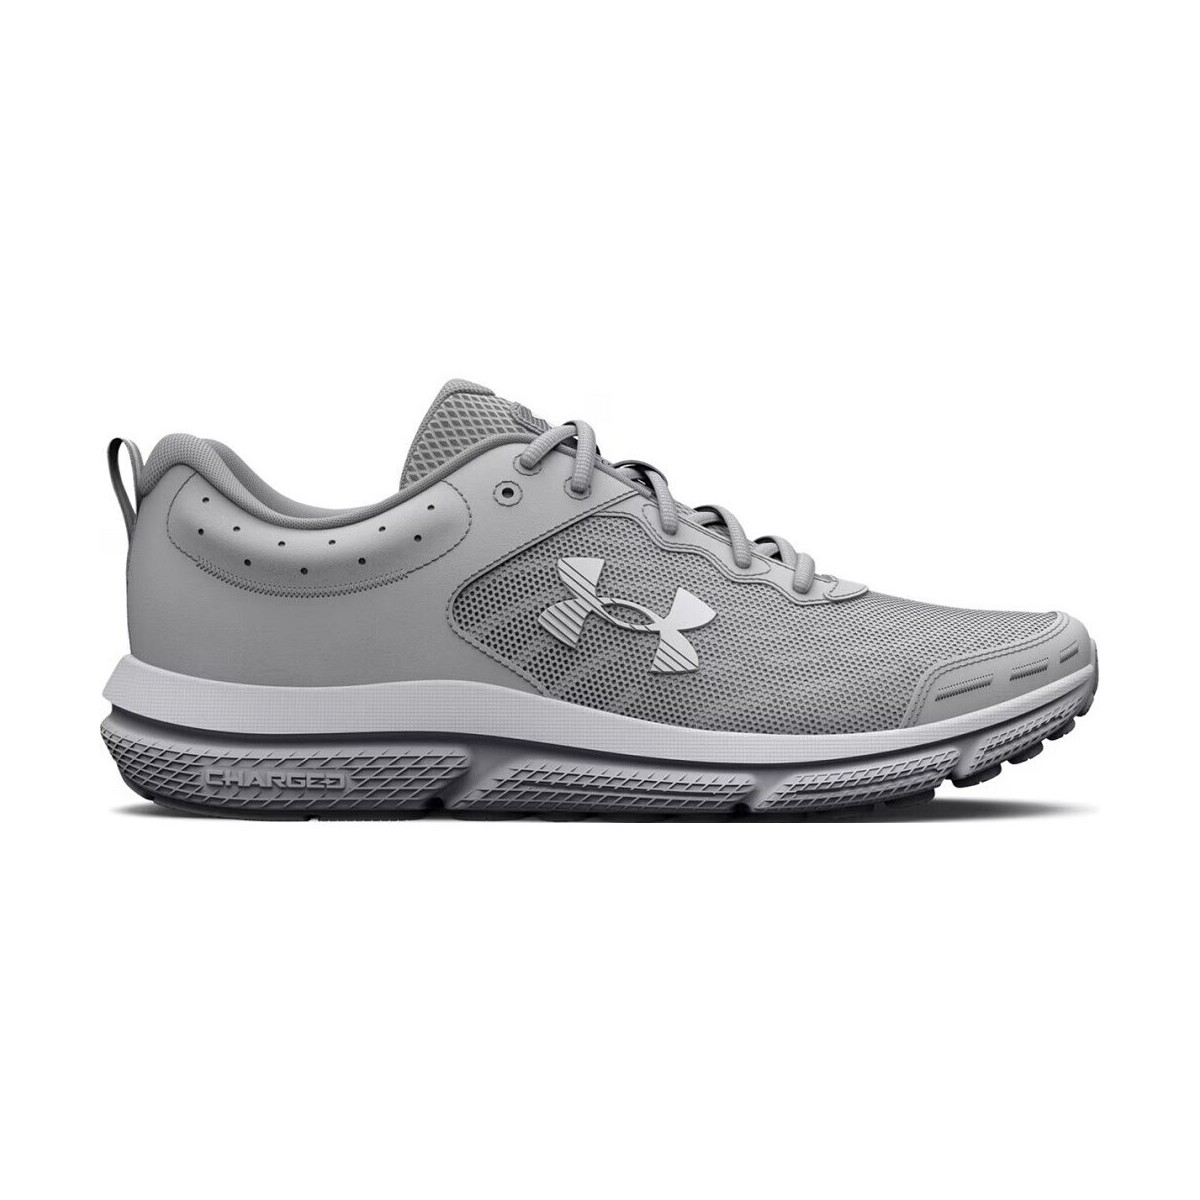 Under Armour Charged Assert 10 Grey